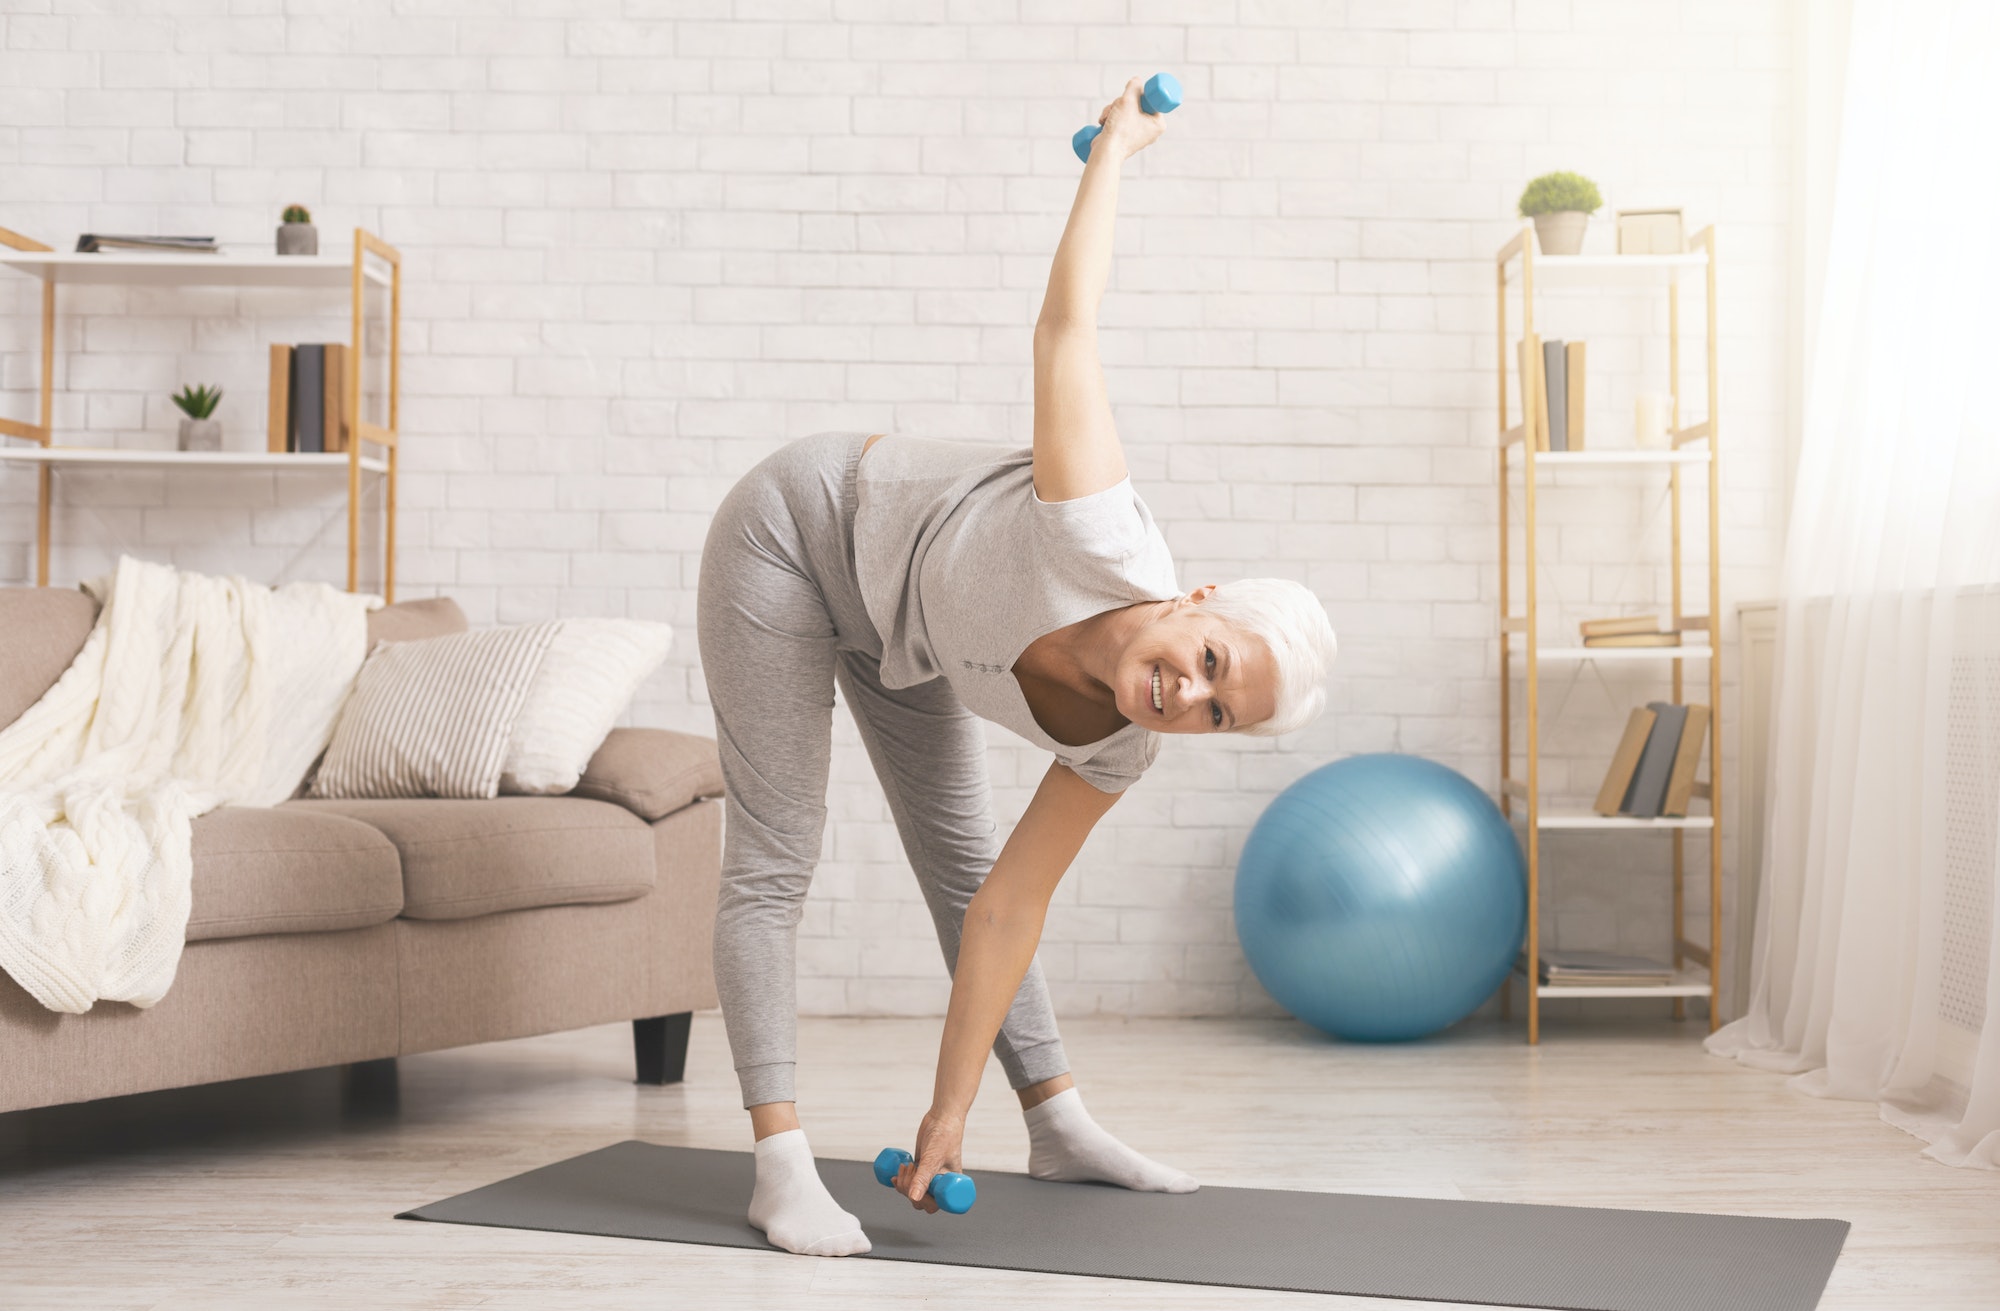 Senior lady exercising with dumbbells at home